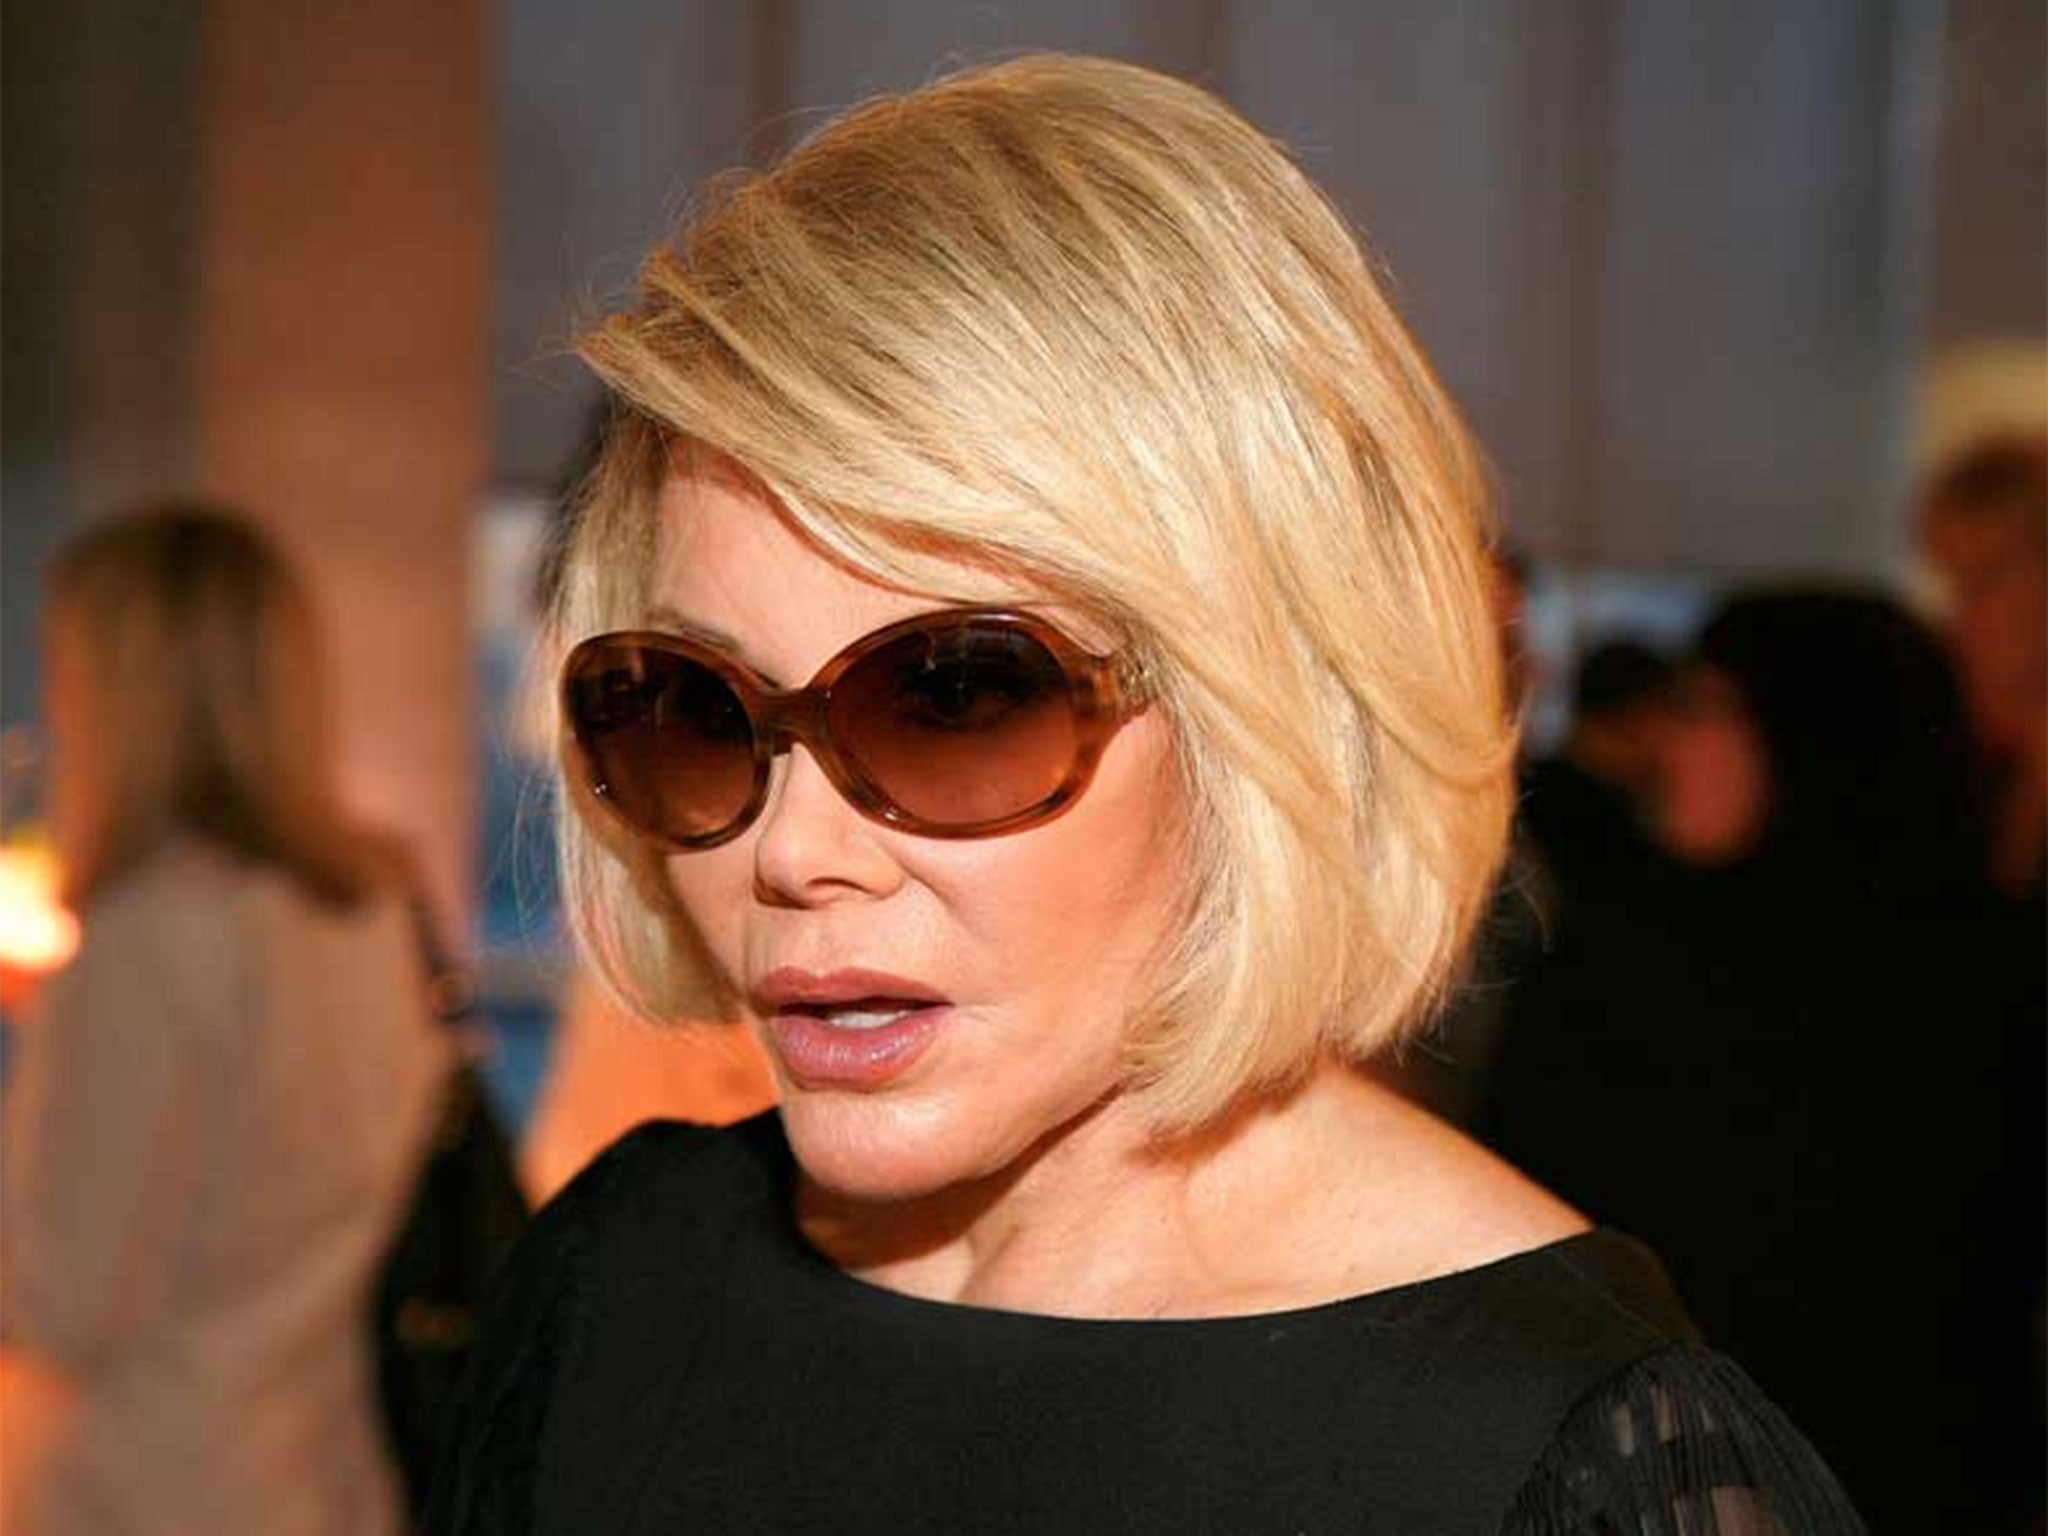 Joan Rivers funeral saw a host of celebrities turn up to pay respects to controversial comedian